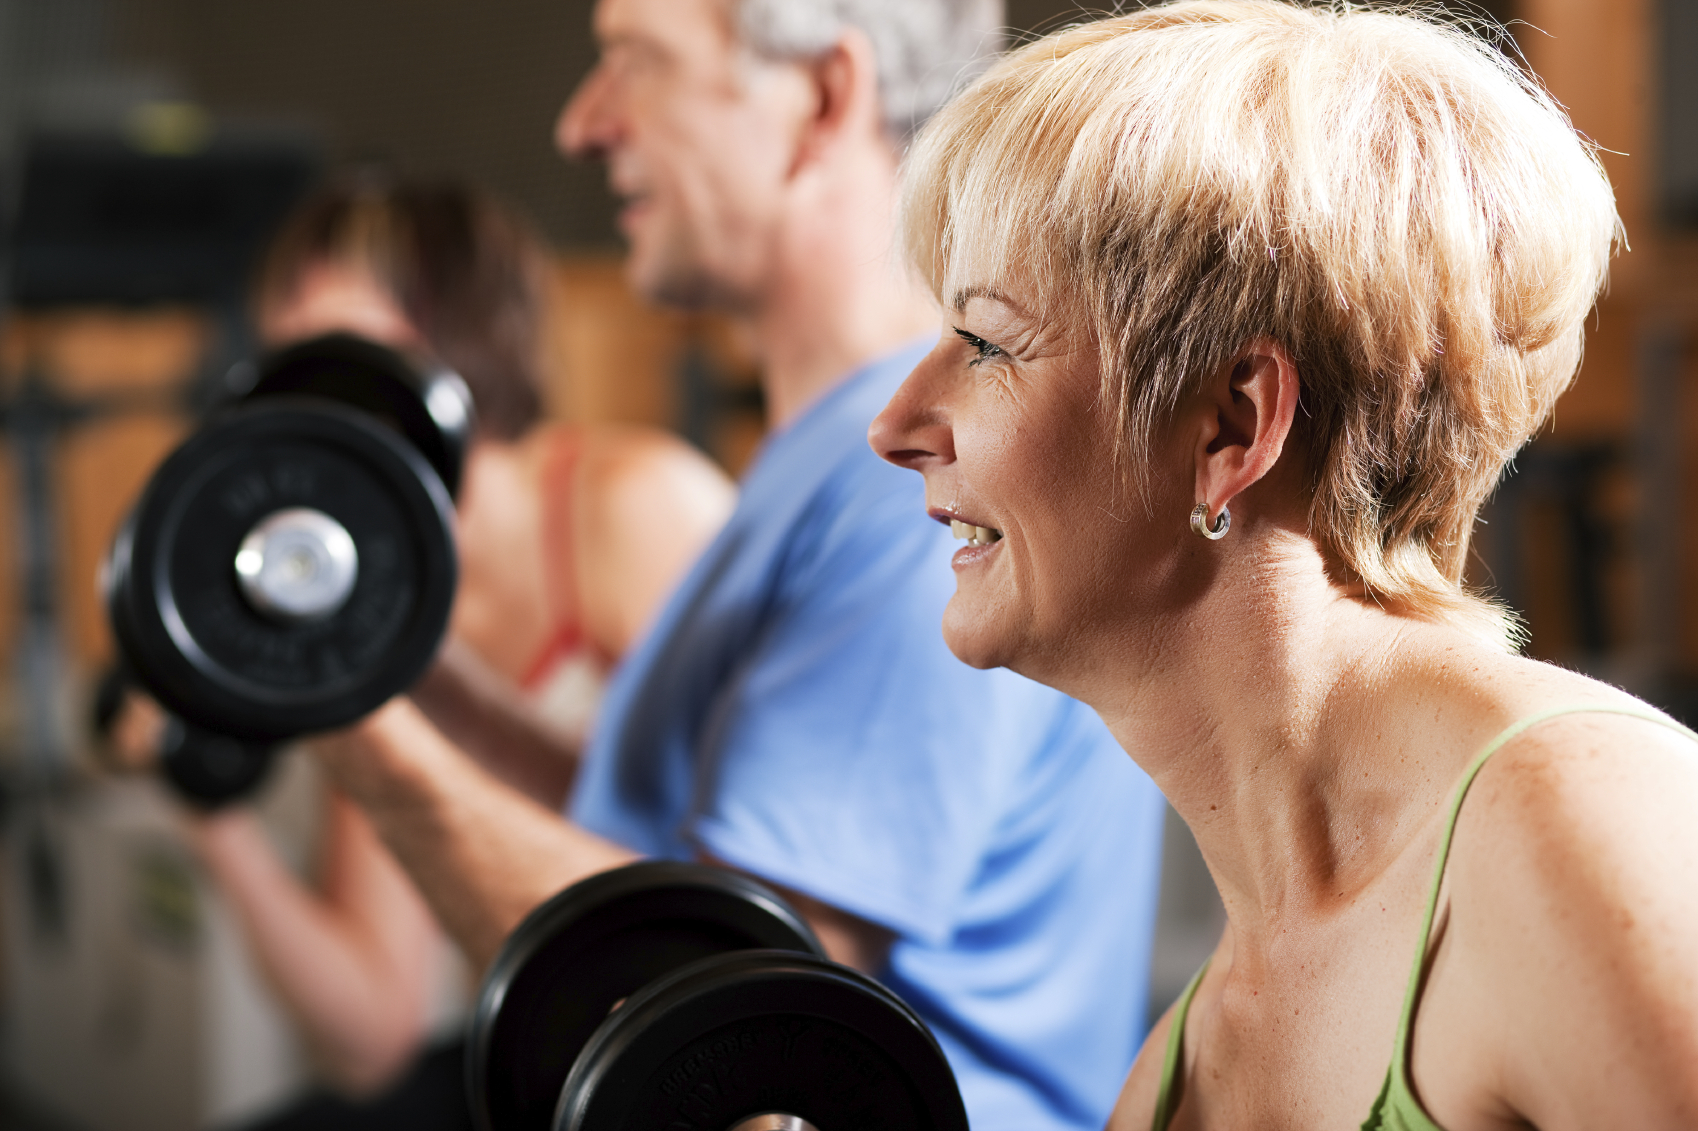 You may think exercise is pointless after a certain age... But new research shows the right amount of exercise can help add five years to seniors’ lives.